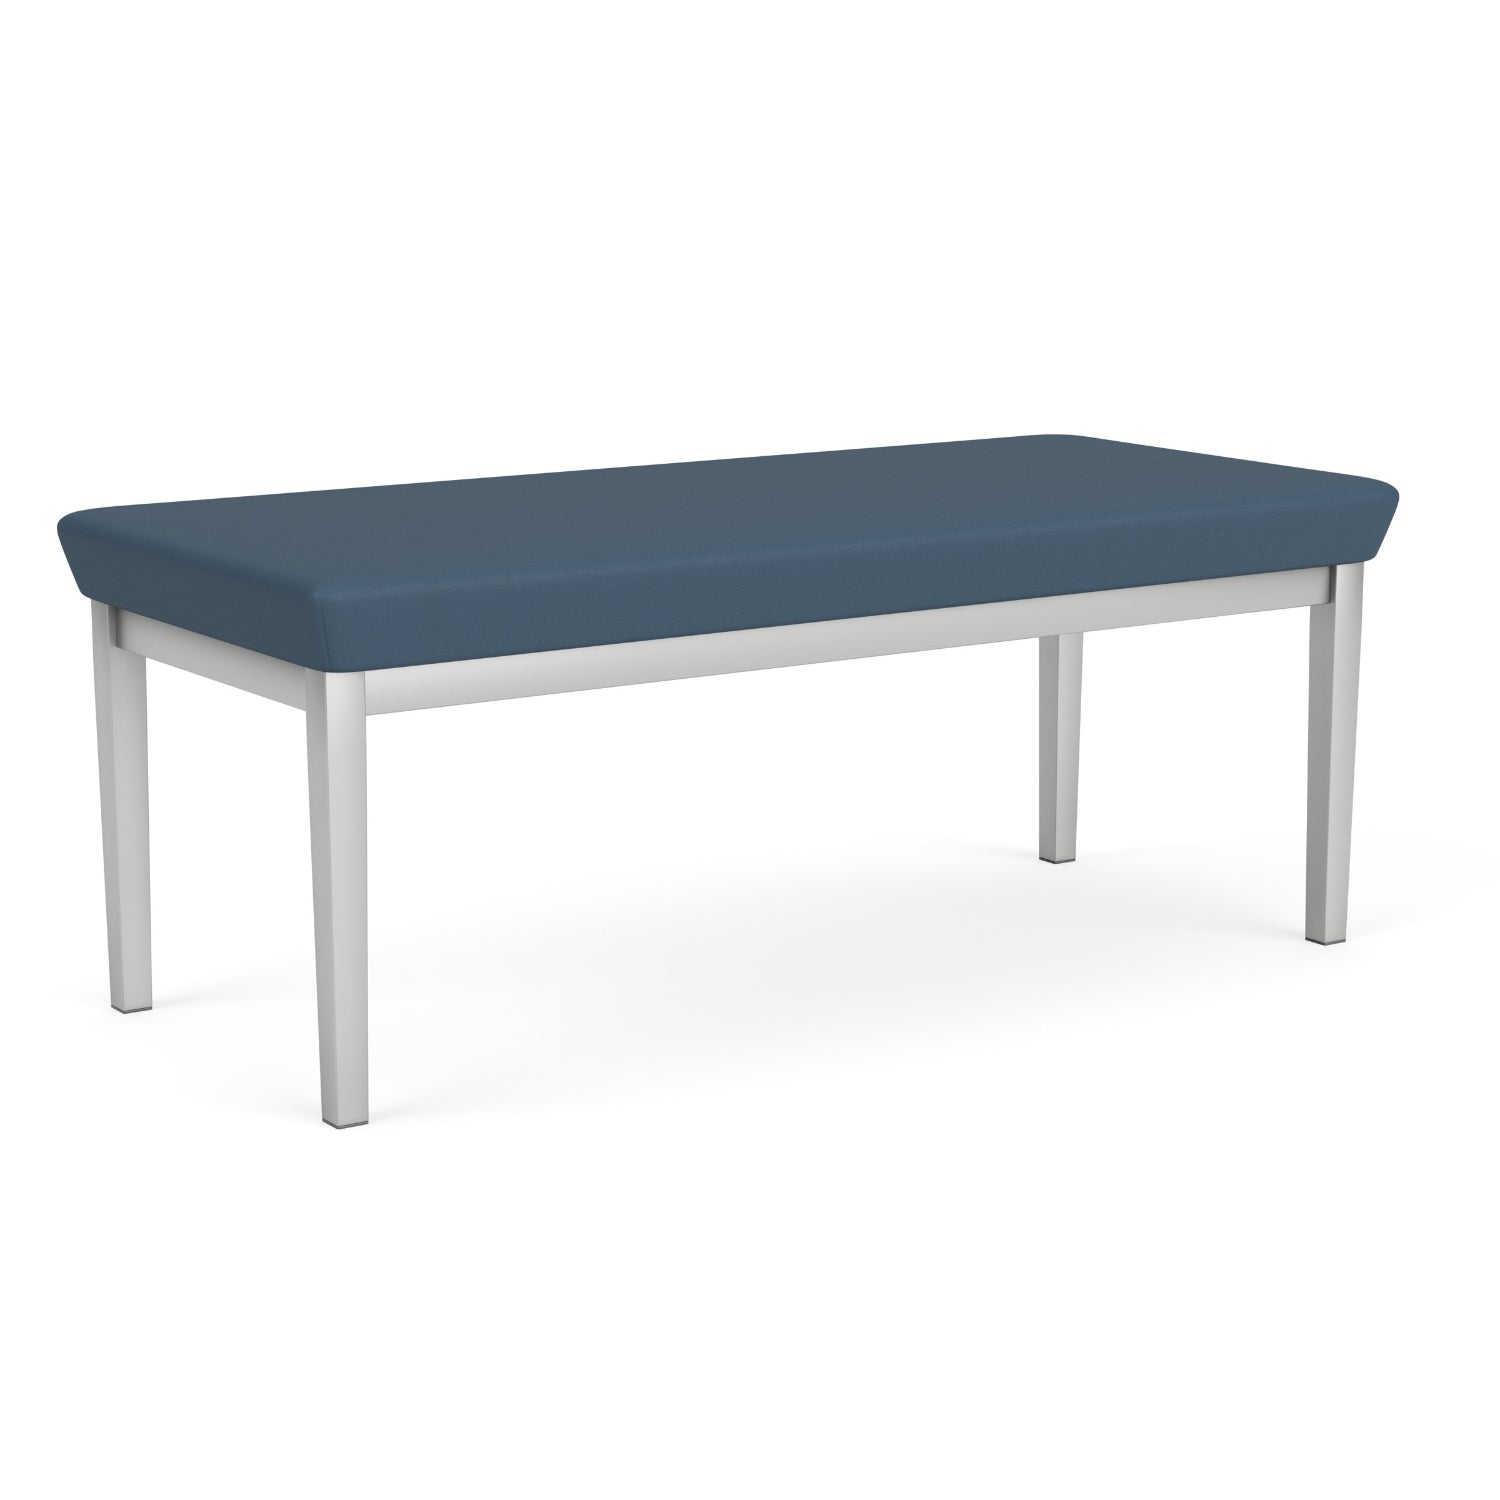 Amherst Steel Collection Reception Seating, 2 Seat Bench, Standard Vinyl Upholstery, FREE SHIPPING